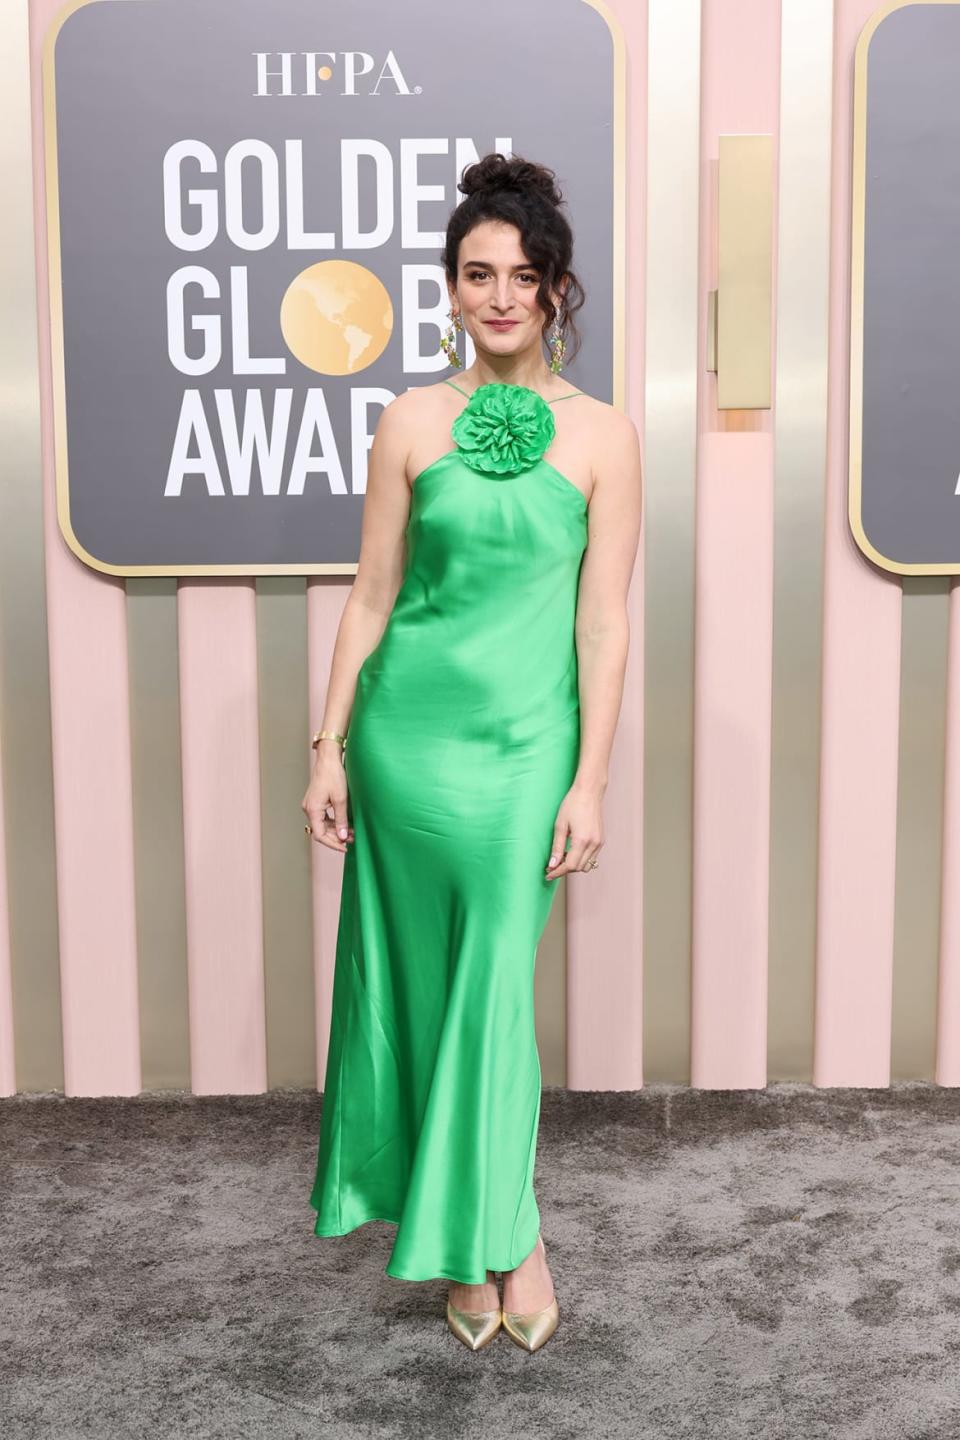 <div class="inline-image__caption"><p>Jenny Slate attends the 80th Annual Golden Globe Awards at The Beverly Hilton on January 10, 2023 in Beverly Hills, California.</p></div> <div class="inline-image__credit">Amy Sussman/Getty Images</div>